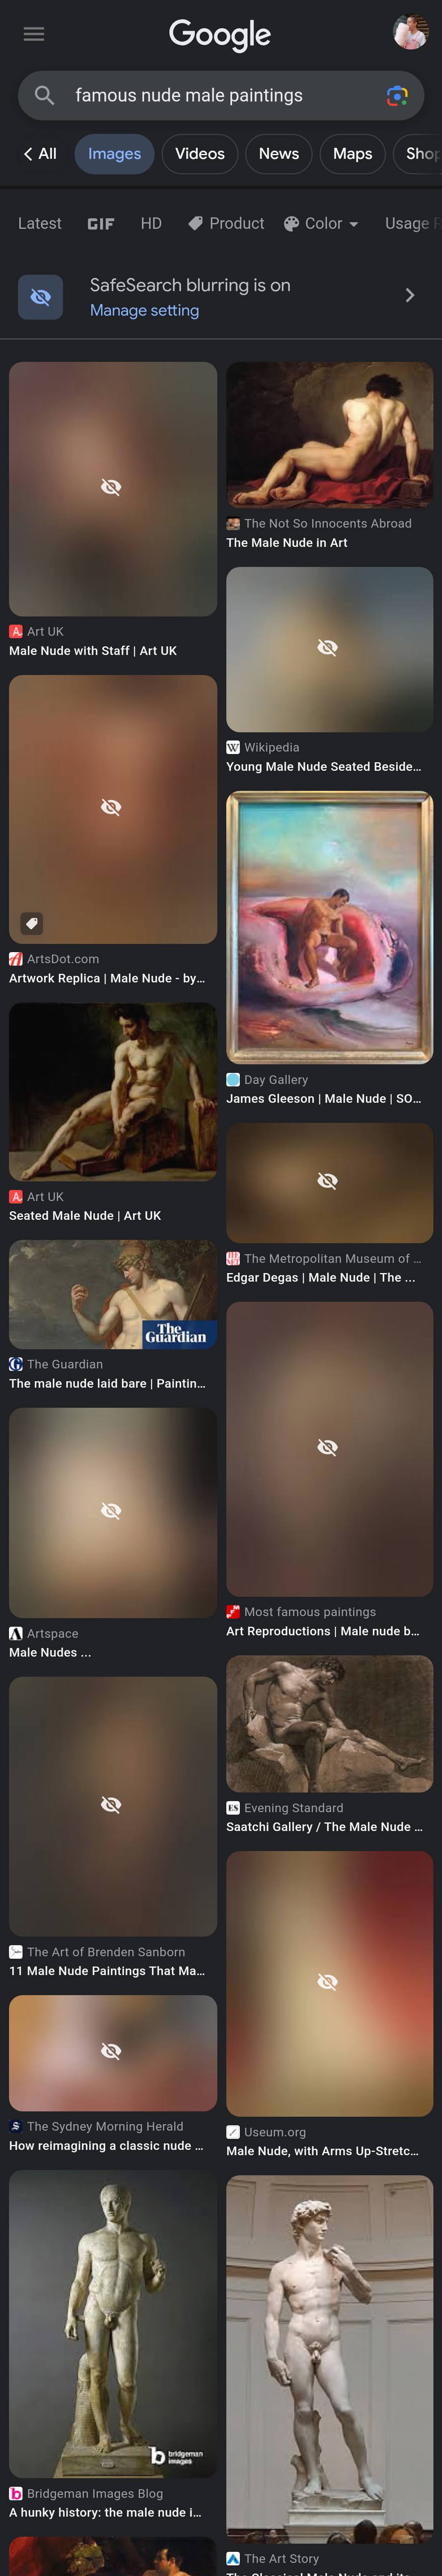 Screenshot of the Google Image search results for 'Famous nude male paintings' taken on a Pixel phone, showing around half of the returned images are blurred beyond recognition